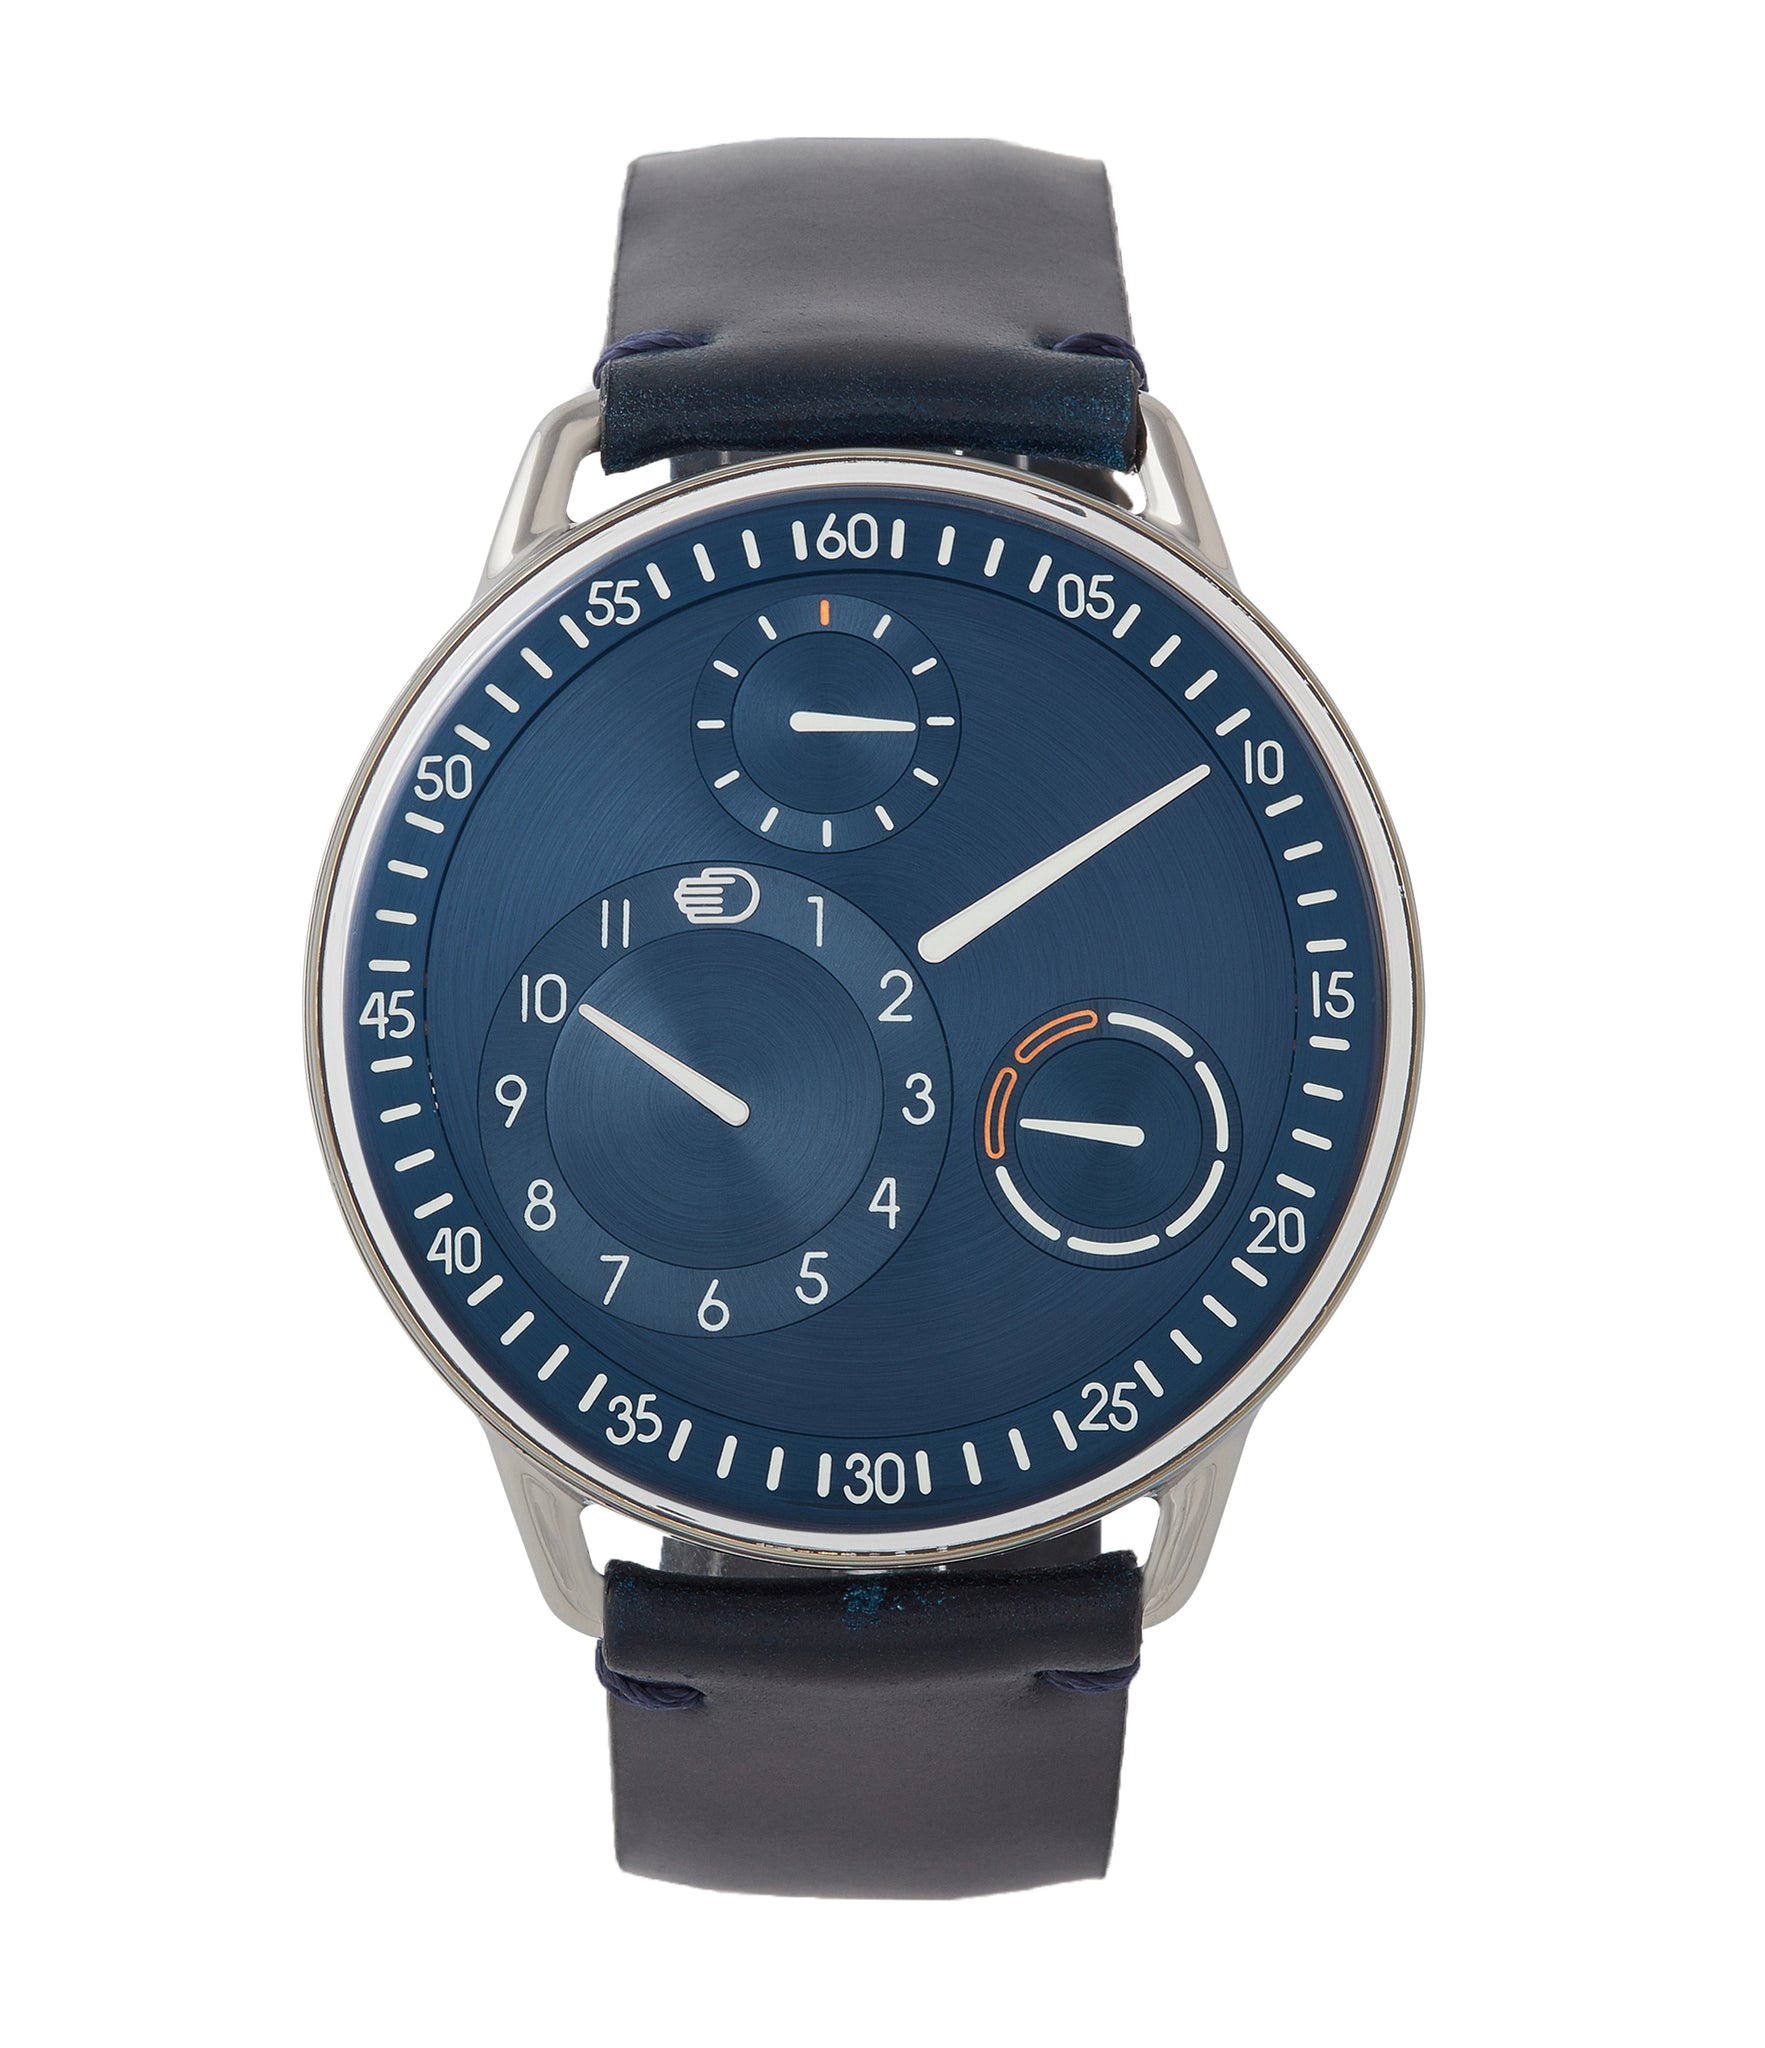 buy Ressence Type 1N titanium blue dial independent watchmaker watch for sale online at A Collected Man London UK specialist of rare watches